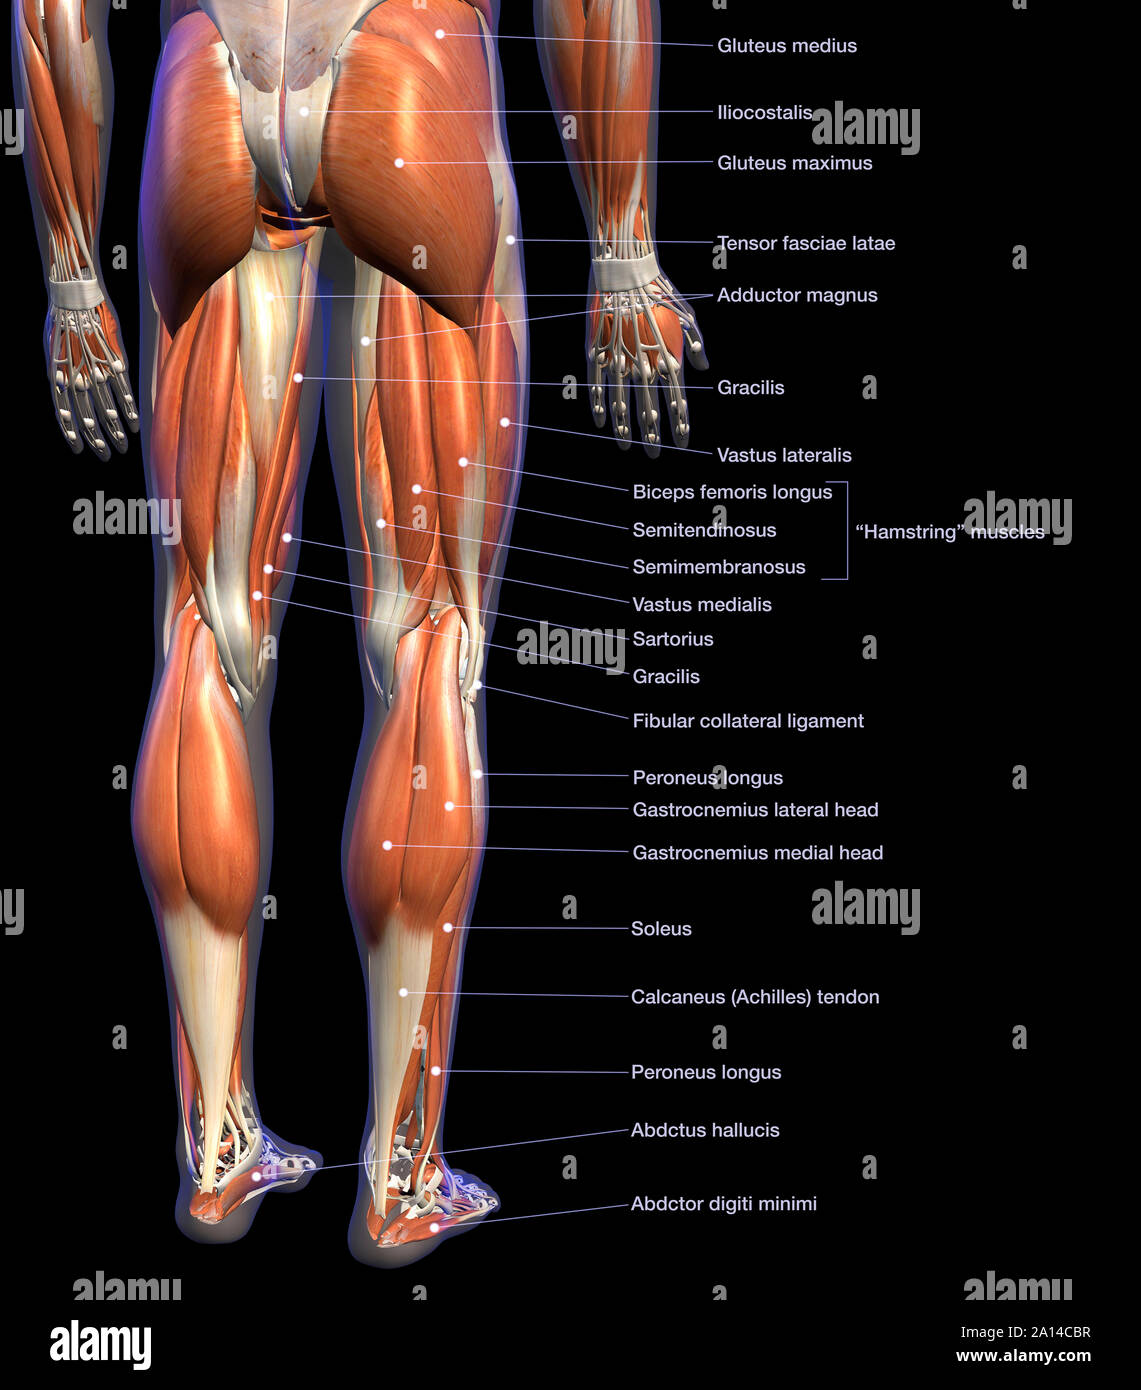 Labeled Anatomy Chart Of Male Leg Muscles On Black Background